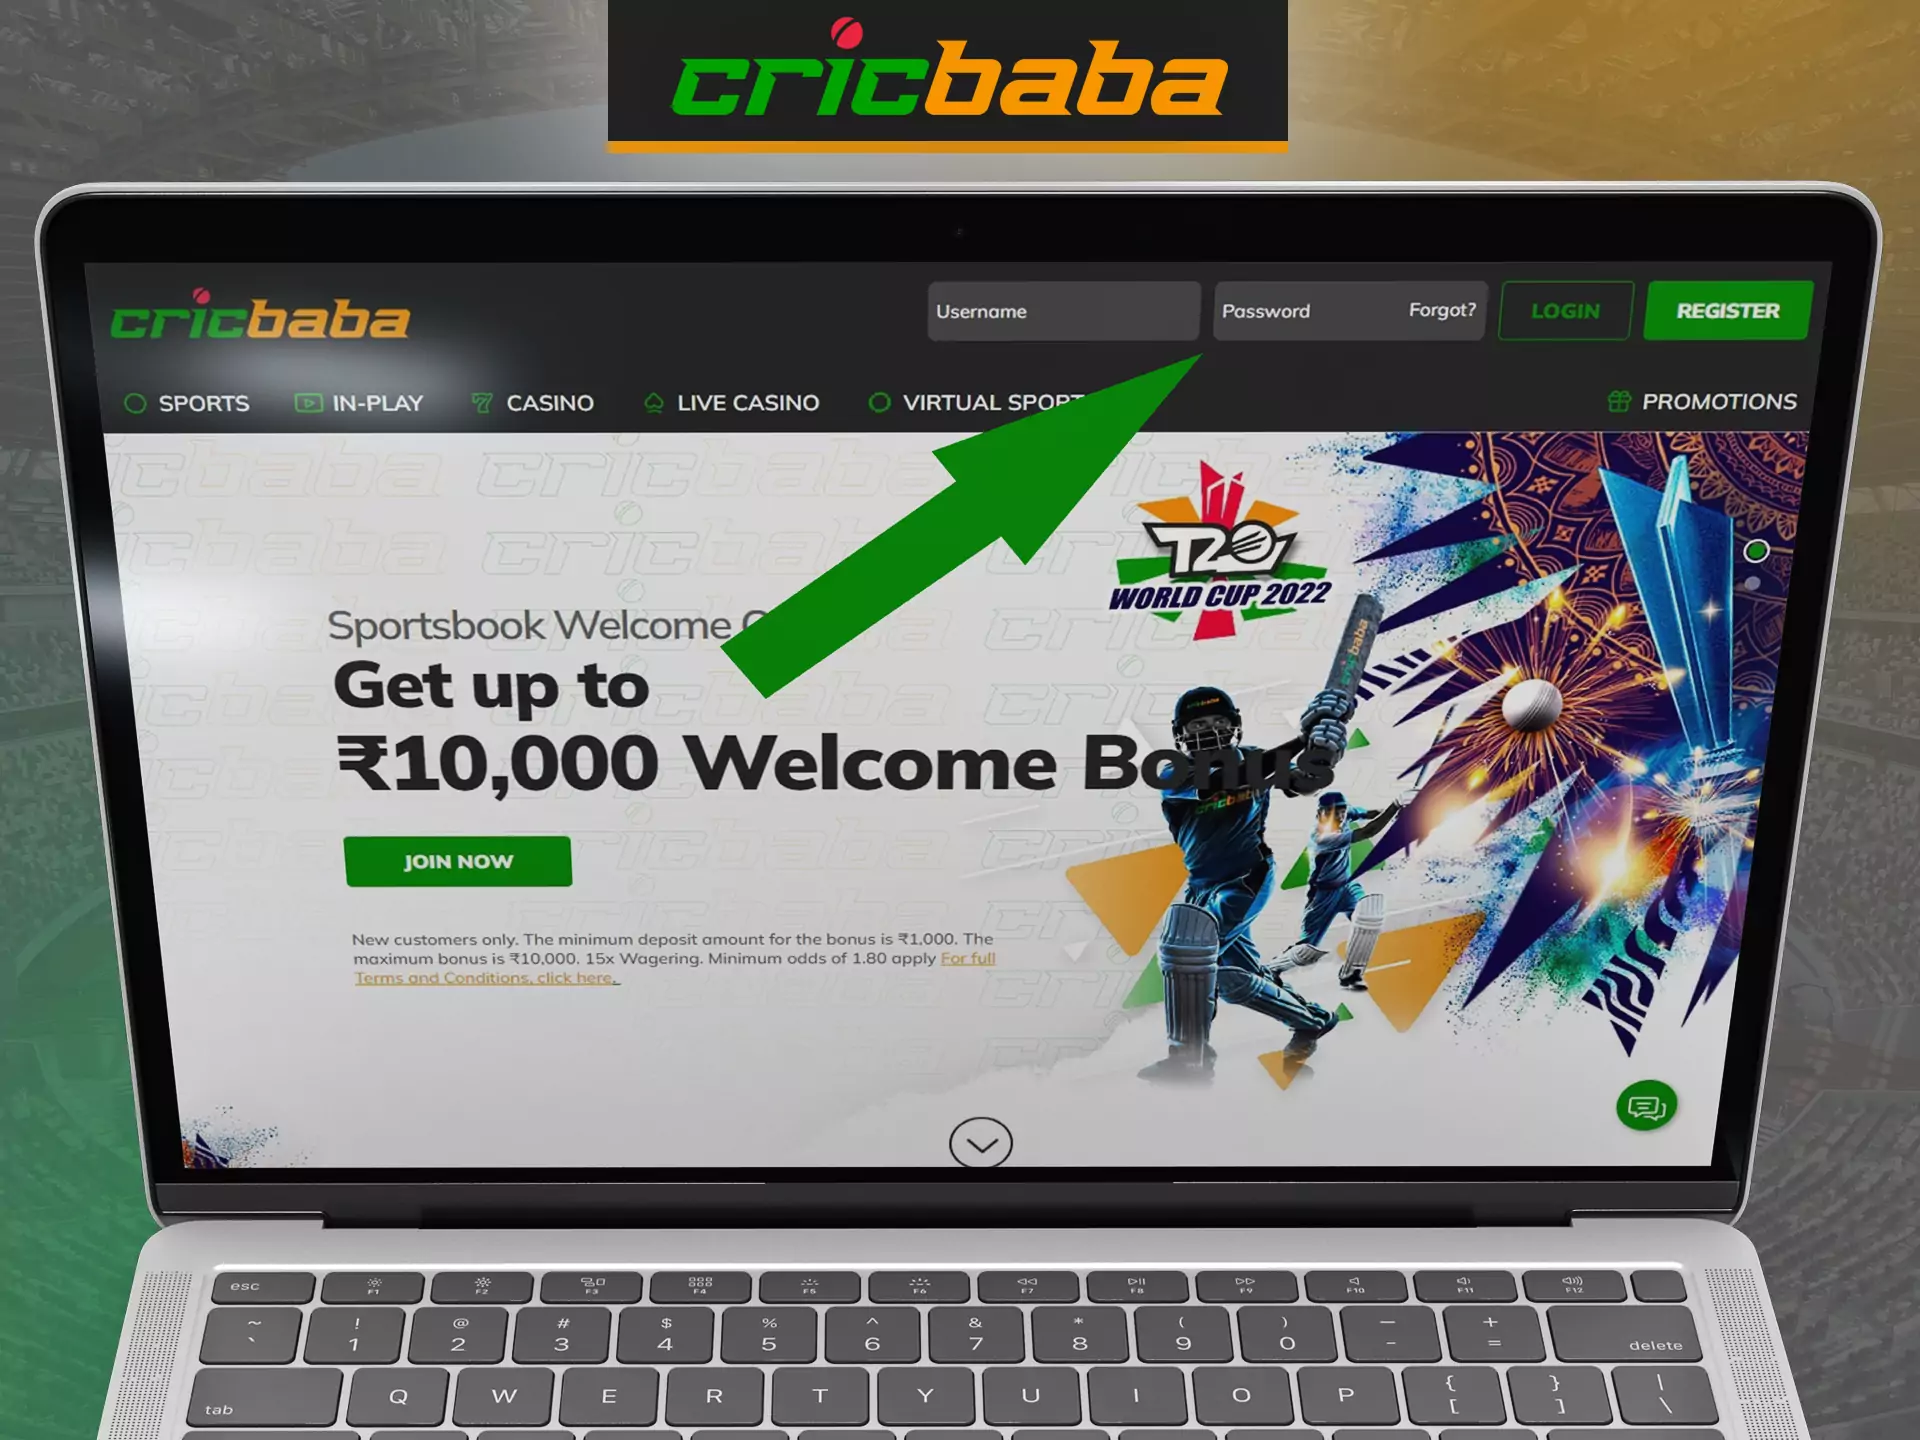 Log into your Cricbaba account to place bets, play and receive bonuses.